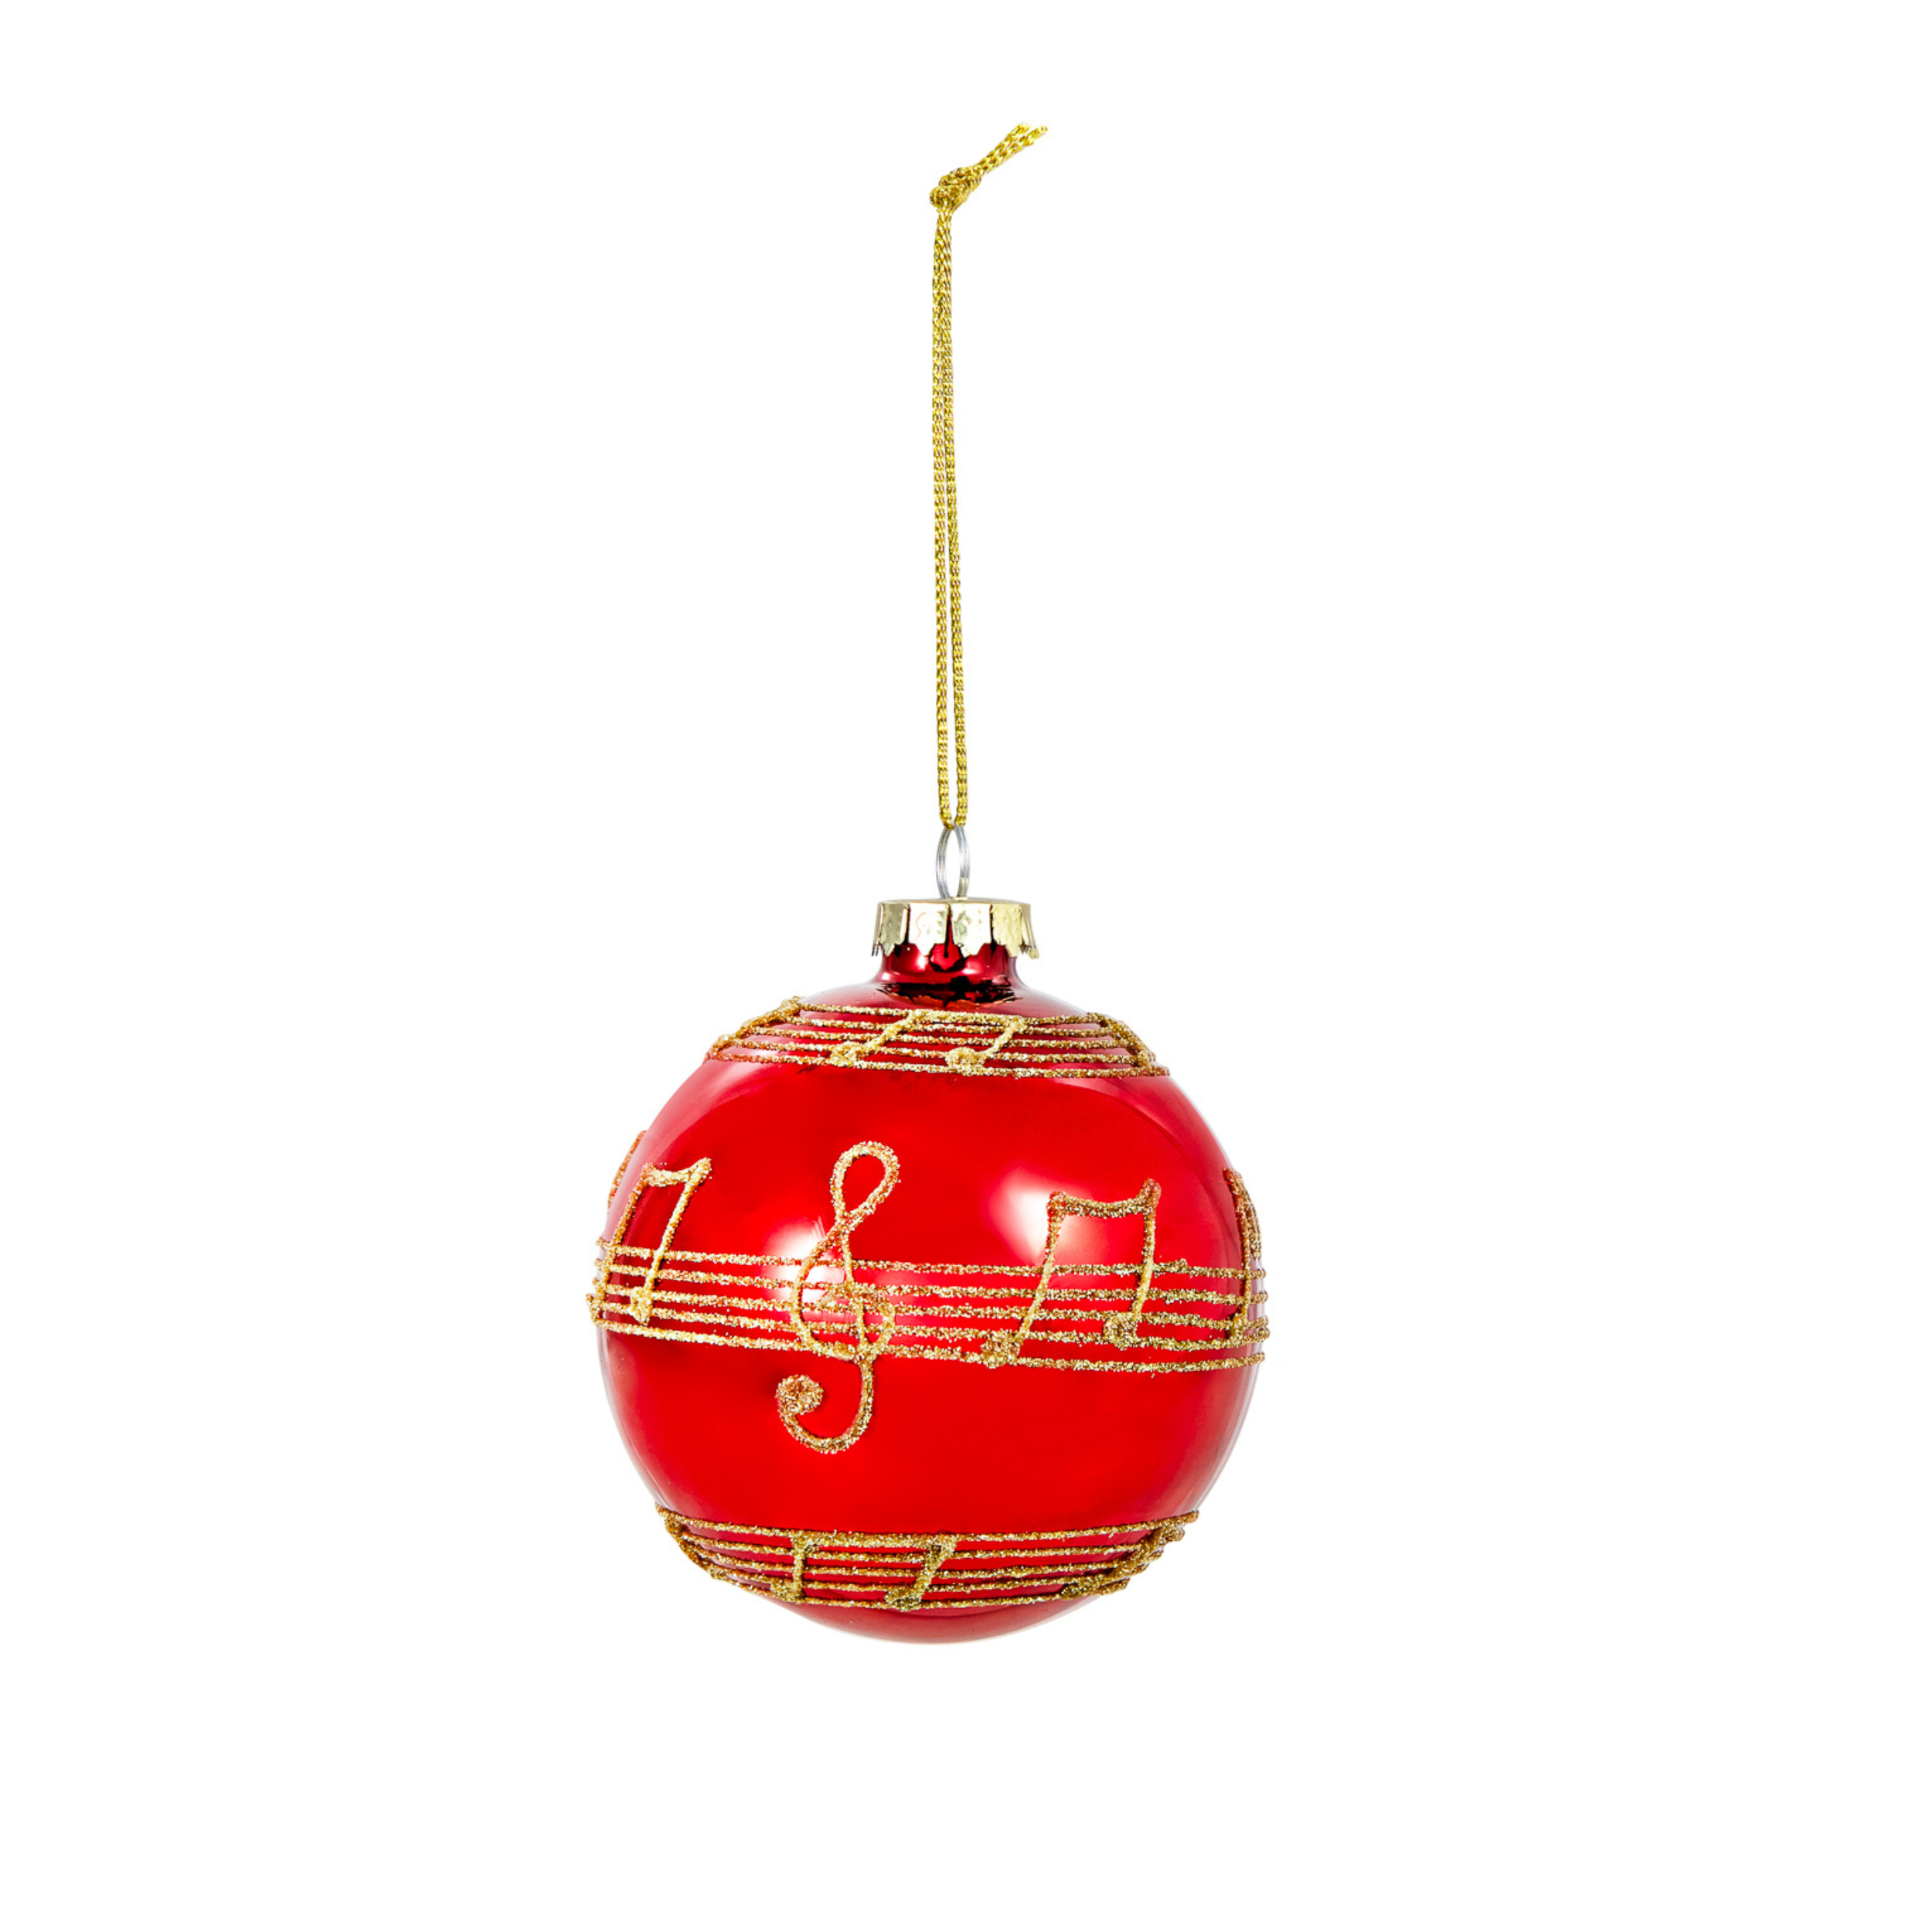 A red bauble with golden details and notes.